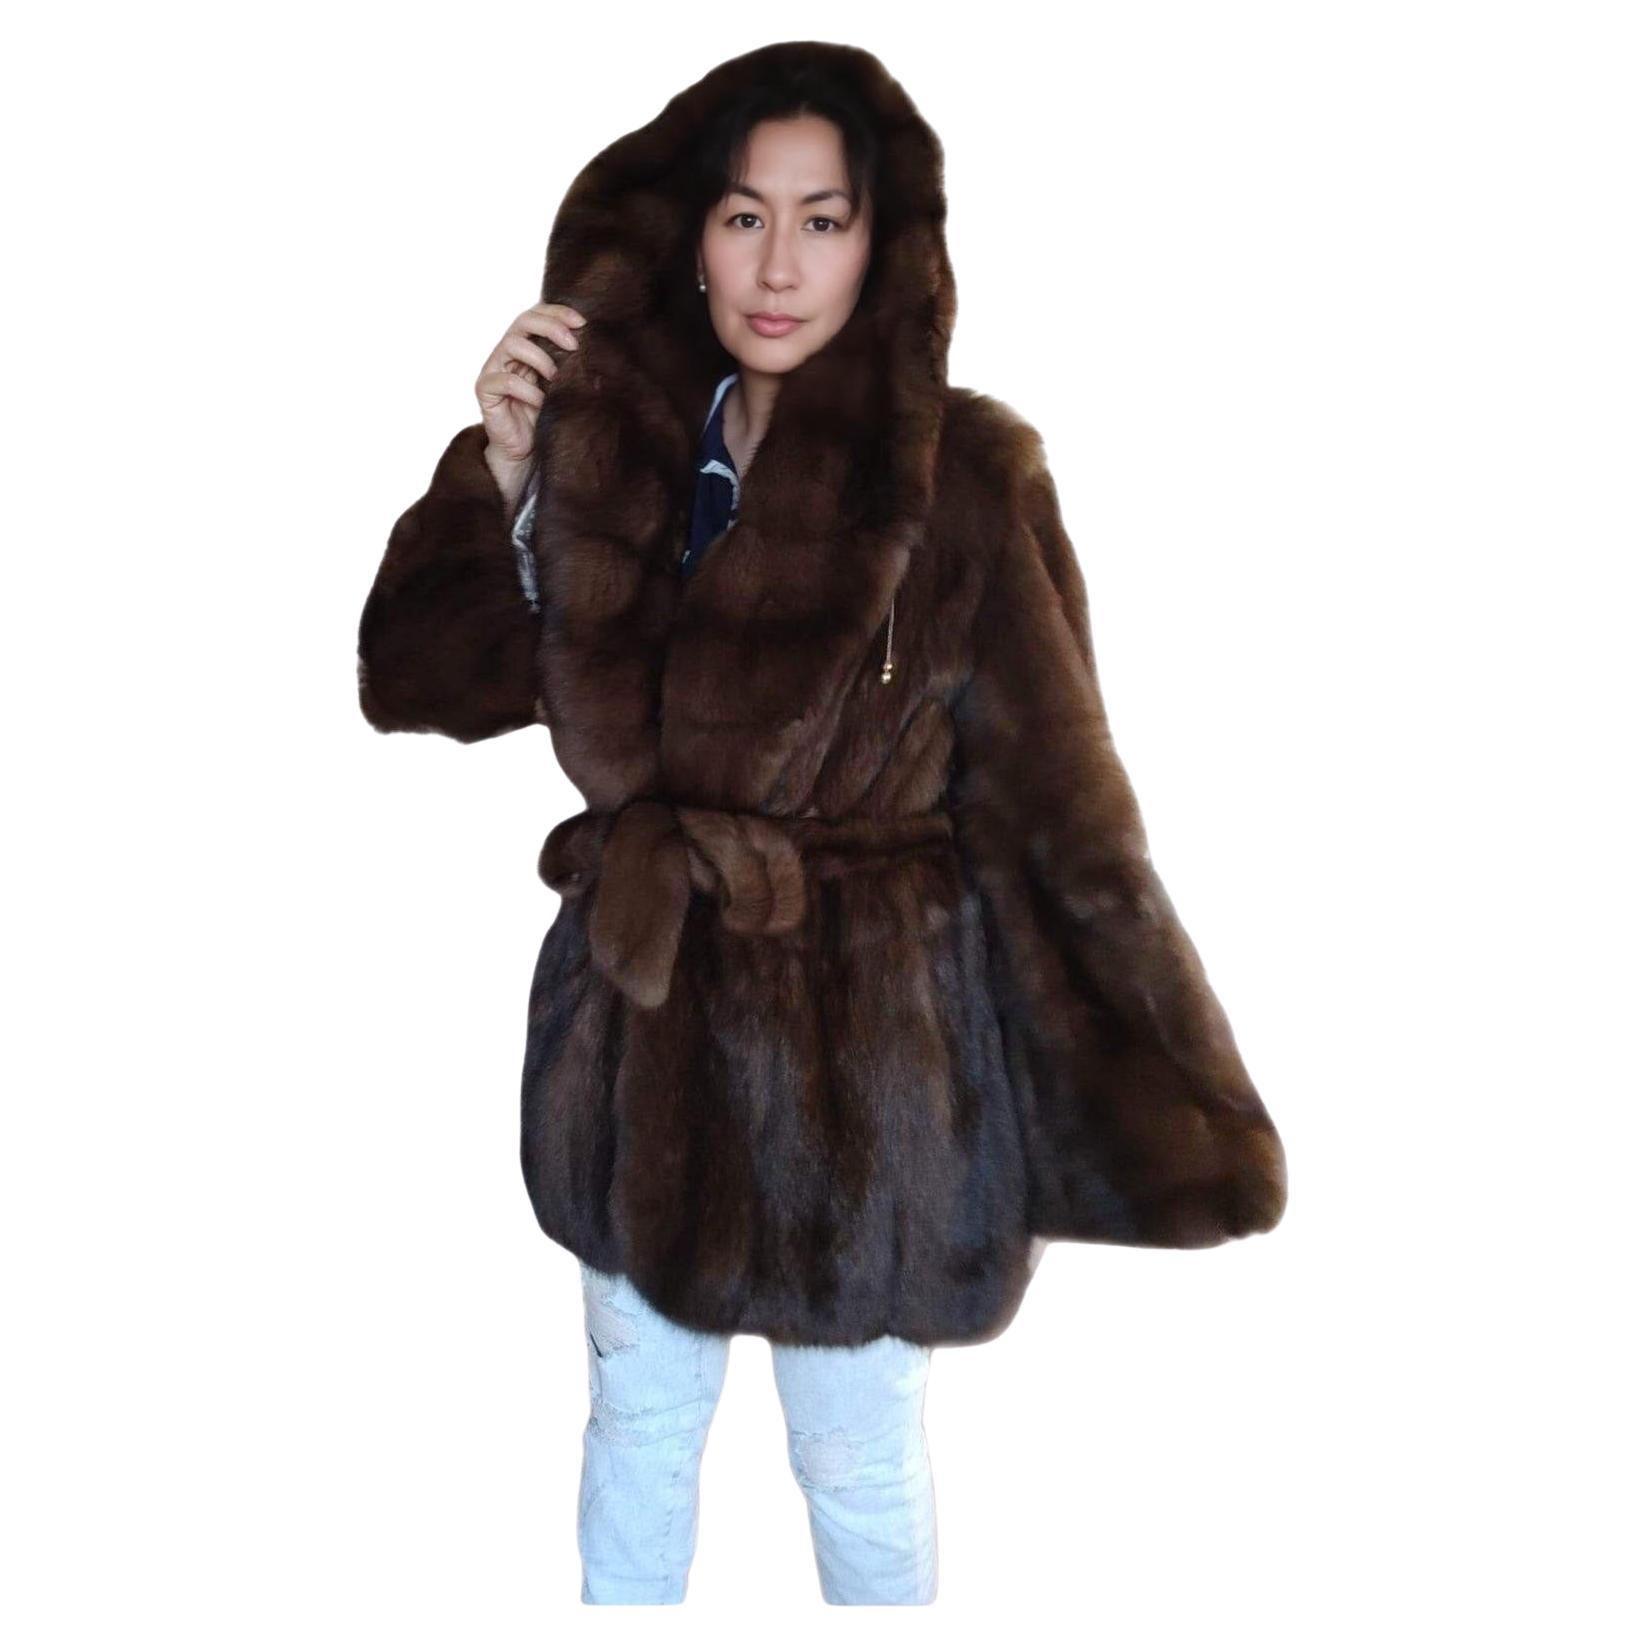 Christian Dior Russian Sable fur coat size 12 tags 55000$ For Sale